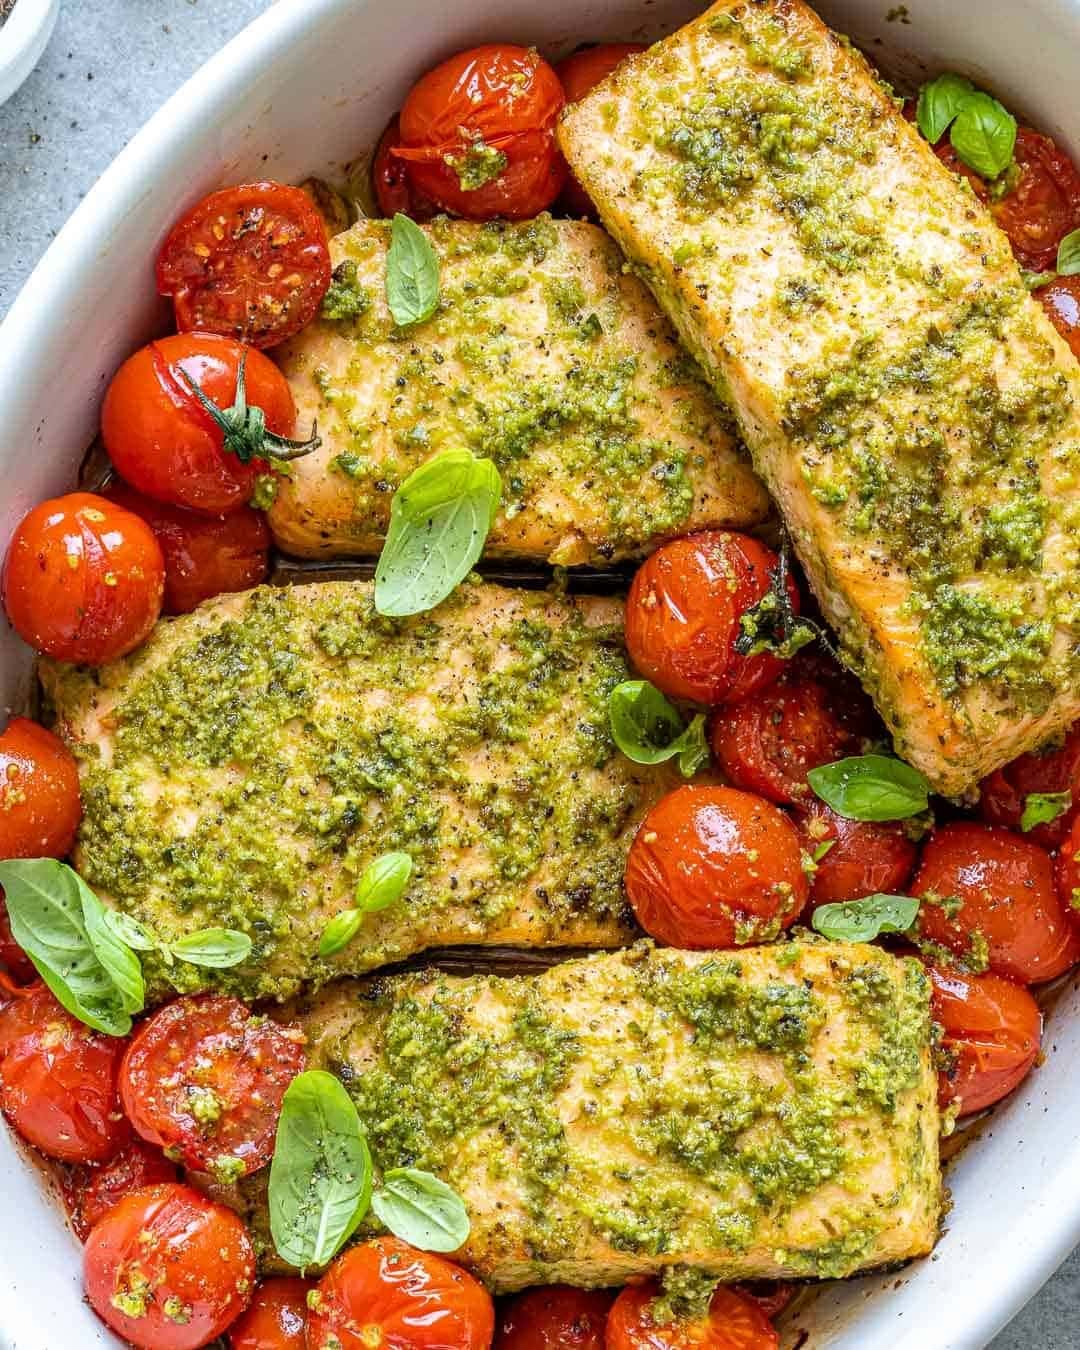 Baked salmon with pesto sauce and cherry tomatoes on a casserole dish.